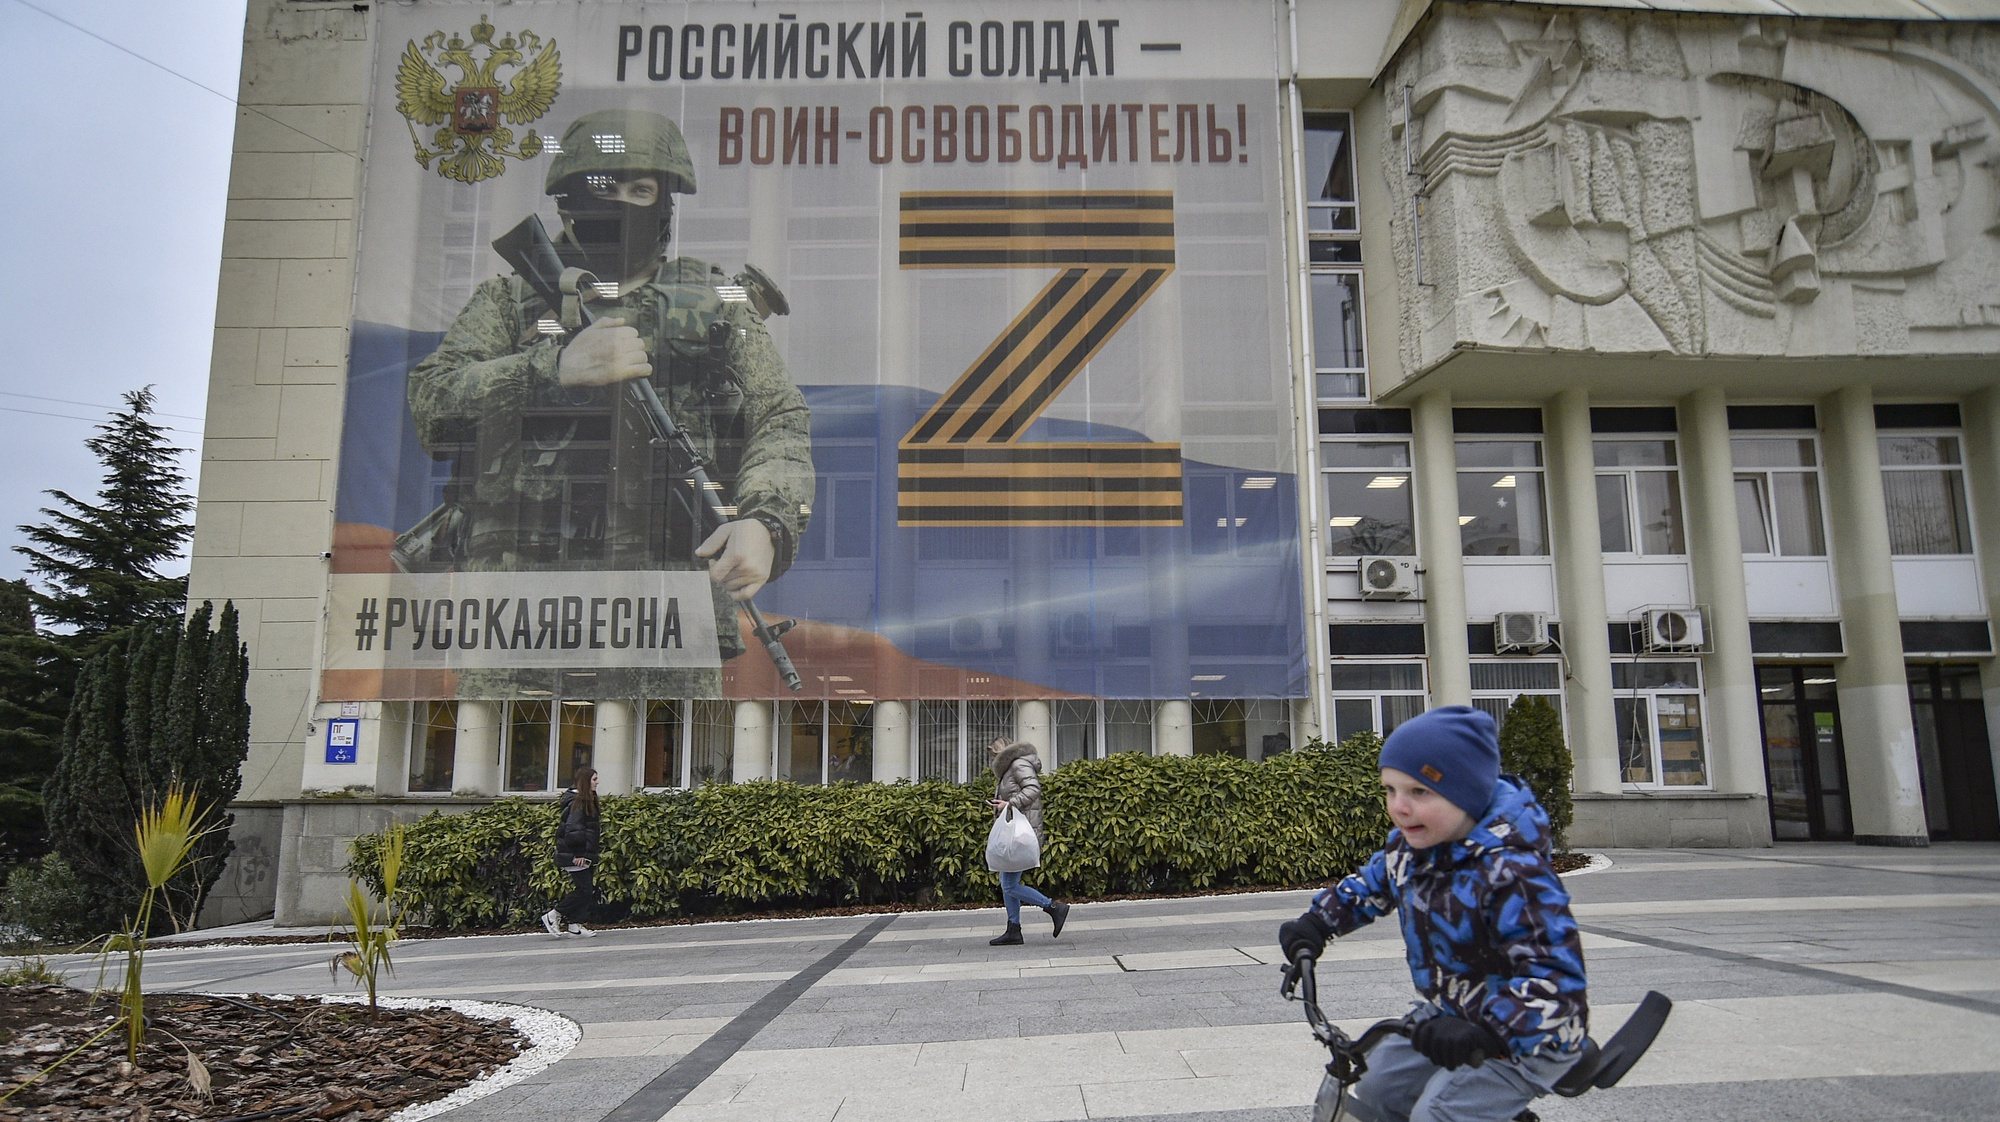 epa10524589 A child rides a bicycle in front of a building with a large banner reading &#039;Russian soldier warrior liberator. Russian spring&#039; along with the letter &#039;Z&#039; in support of Russia&#039;s armed forces involved in the country&#039;s military campaign in Ukraine, in downtown Yalta, Crimea, 15 March 2023. In February 2014 Russian forces invaded and seized control of the Crimean Peninsula. Russia declared the annexation of Crimea on 18 March 2014, two days after the celebration of a so called &#039;referendum&#039; in that territory. In a vote that reaffirmed Ukraine&#039;s &#039;national unity and territorial integrity&#039;, the United Nations General Assembly in the Resolution 68/262 condemned the referendum in Crimea stating it had &#039;no validity&#039;. After the annexation Moscow escalated its military presence on the peninsula to solidify the new status quo on the ground and since 2015, Russia approved the &#039;Day of Reunification of Crimea with Russia&#039; as a holiday marked annually on 18 March.  EPA/STRINGER